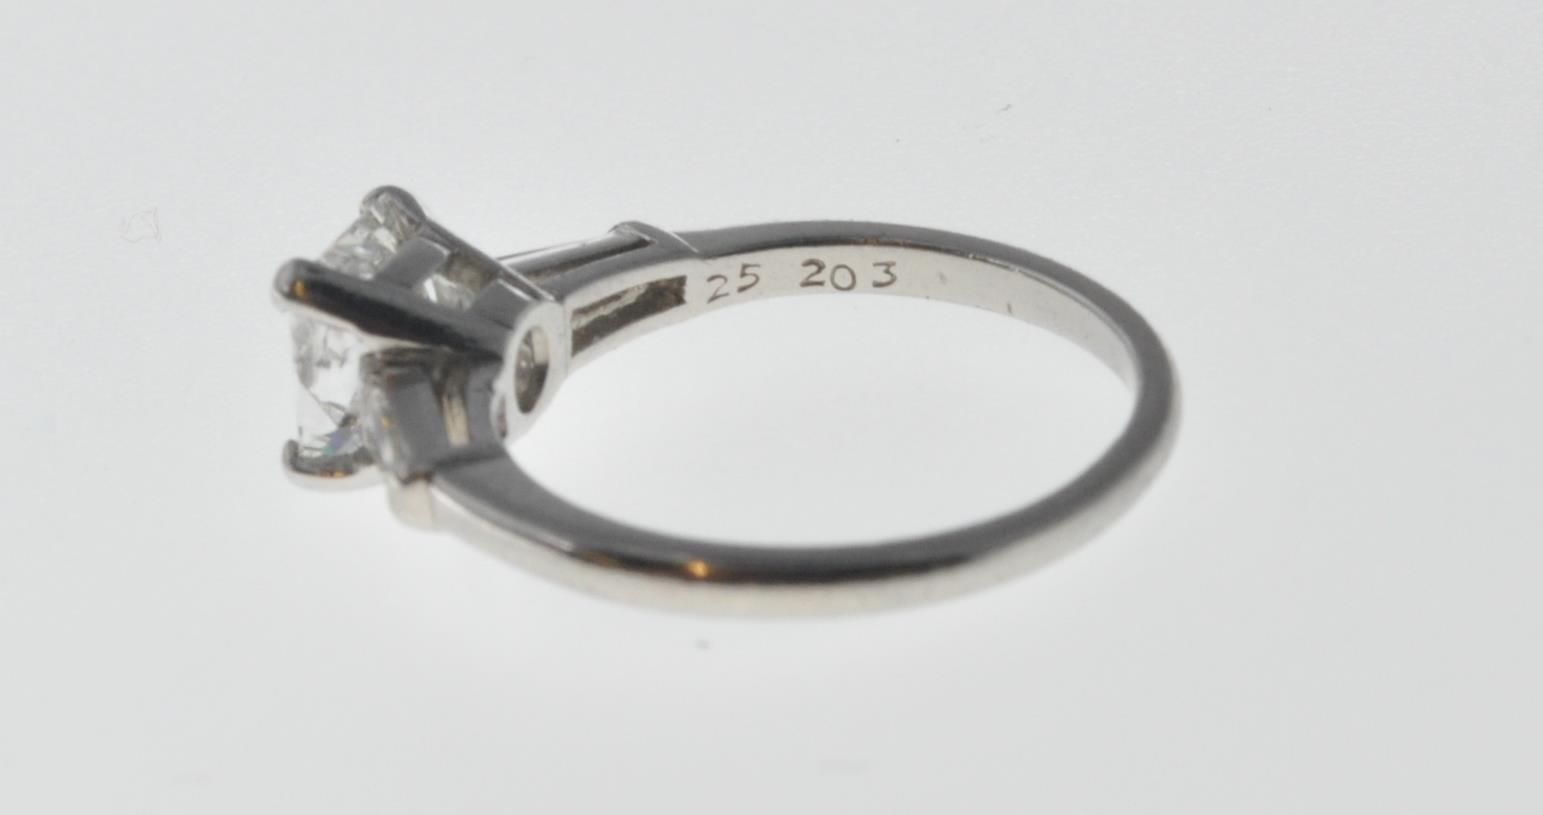 PLATINUM AND DIAMOND SOLITAIRE RING - Image 6 of 7